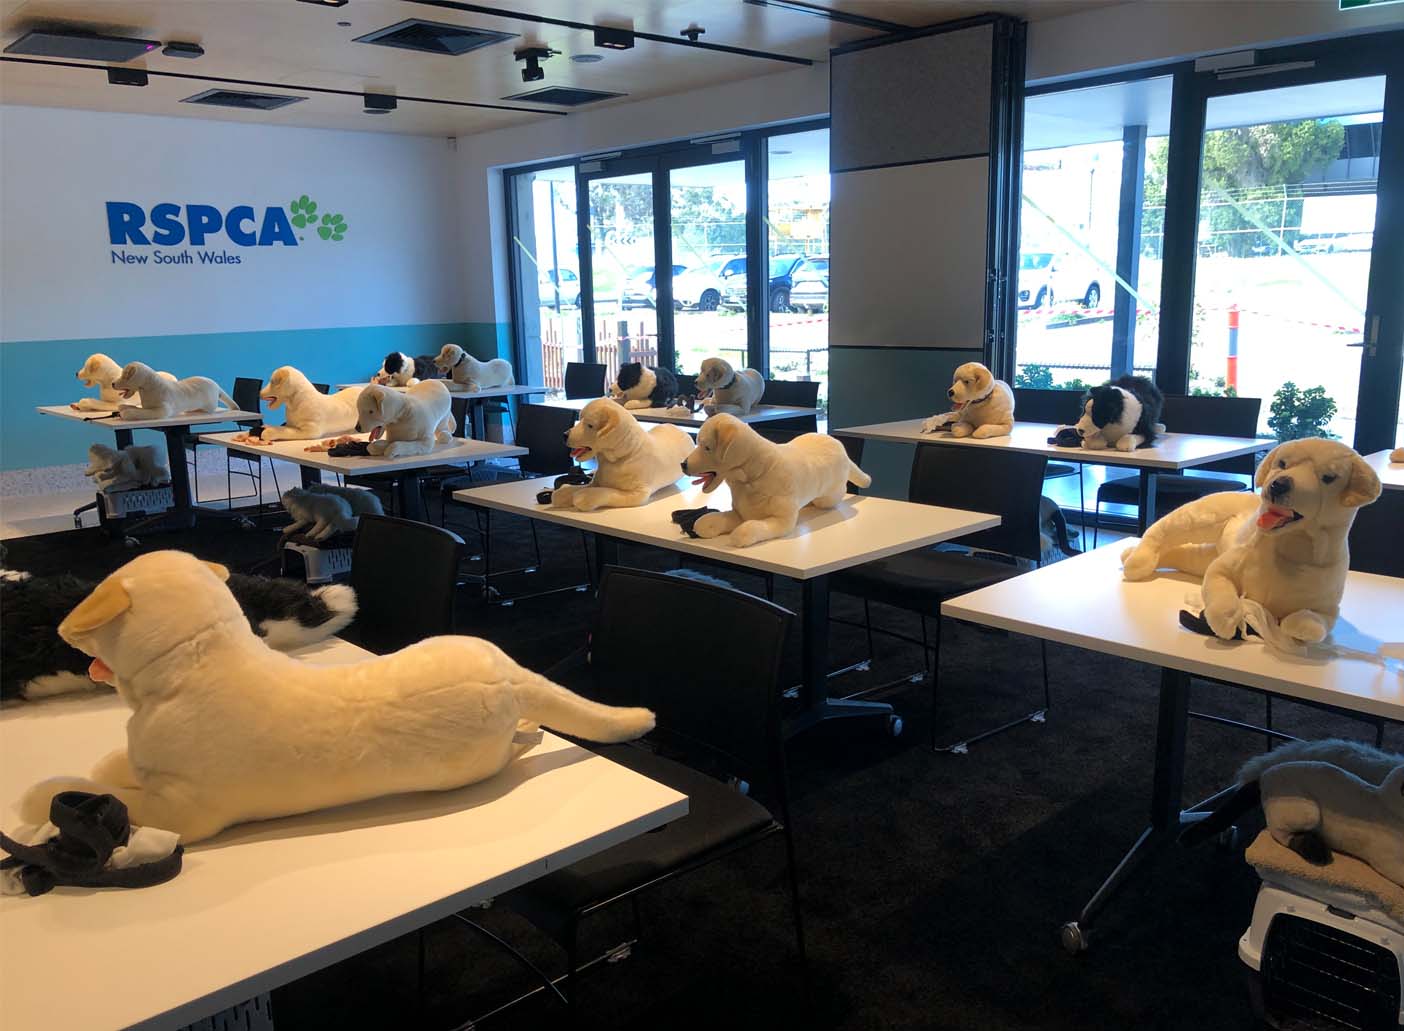 RSPCA NSW Education Centre <br> State-Of-The-Art Venues